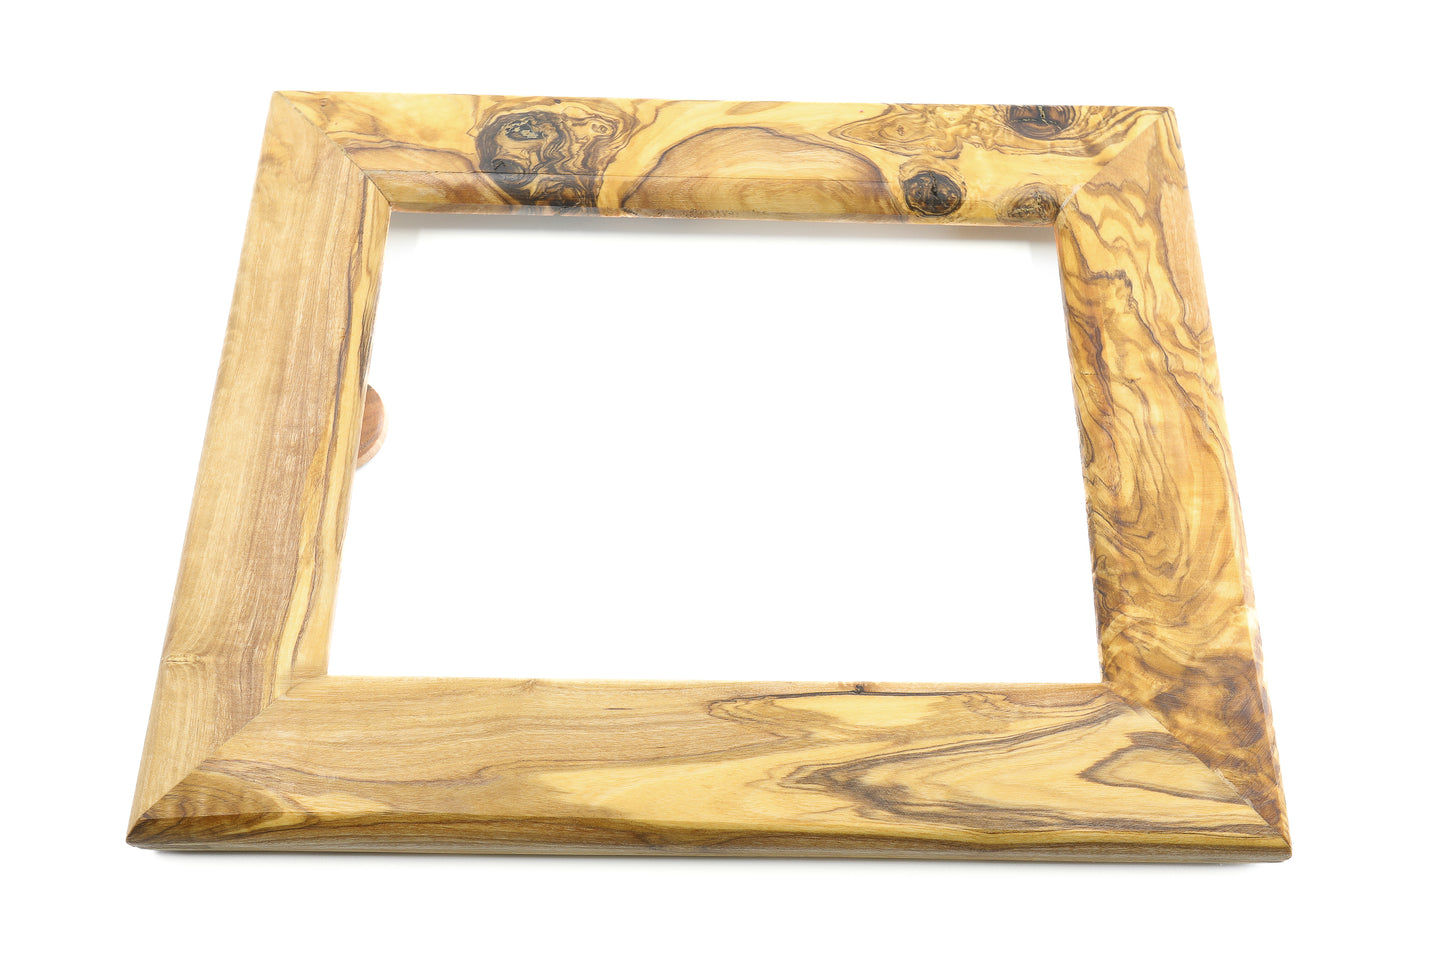 Artisanal picture frame crafted from exquisite olive wood